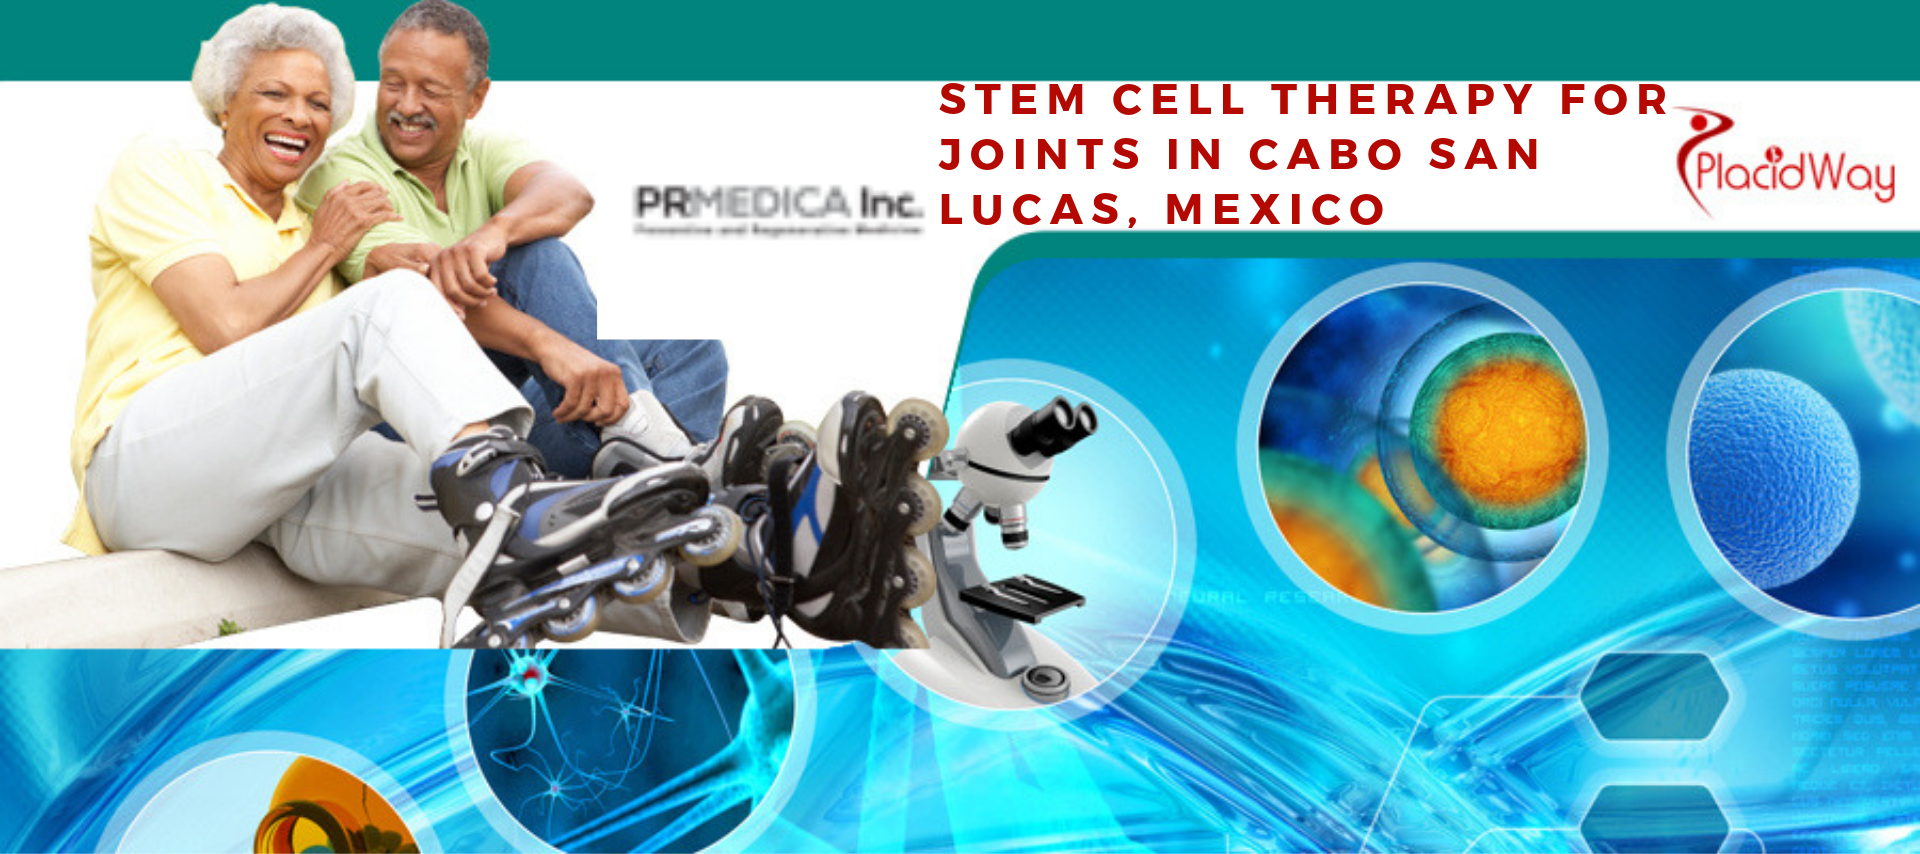 Stem Cell Therapy for Joints in Cabo San Lucas, Mexico